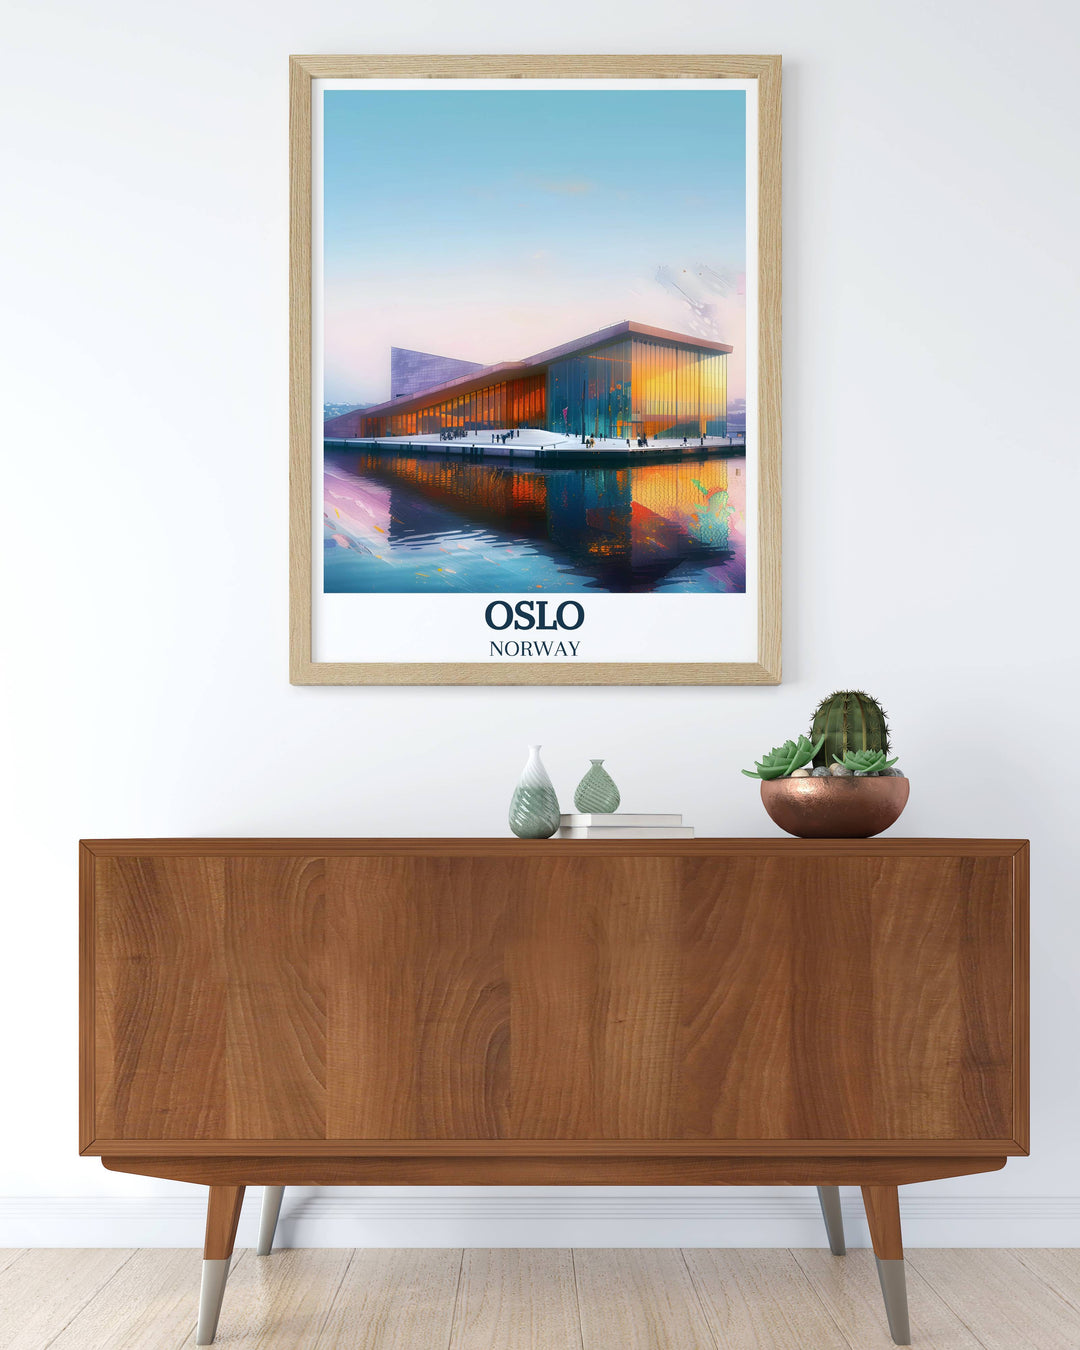 Home decor featuring The Oslo Opera House, a symbol of Norwegian innovation and artistic excellence.